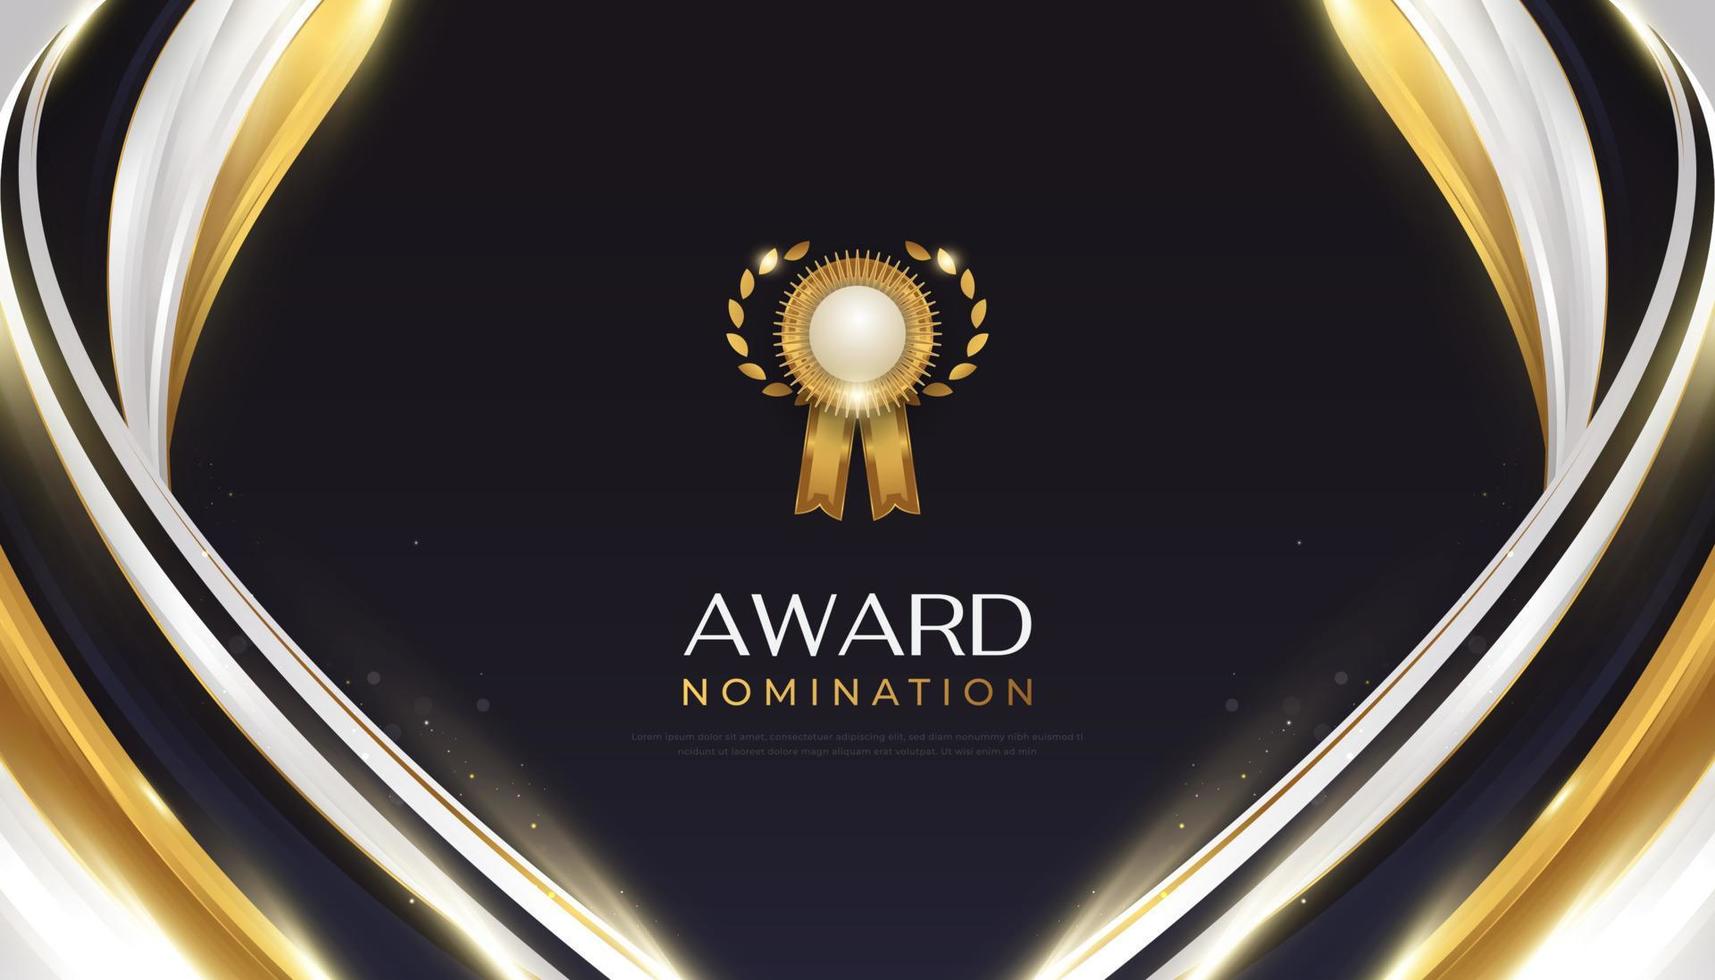 Luxury Award Nomination Ceremony Background with Golden Sparkles and Medal vector